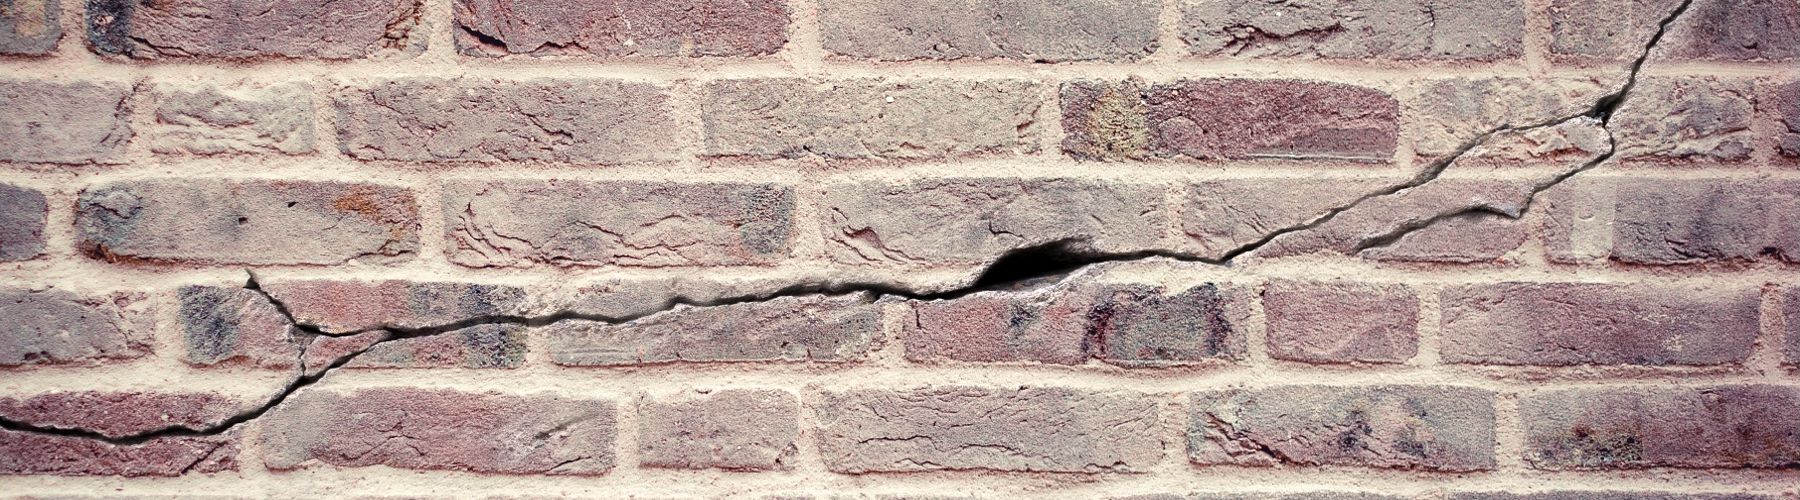 Building Subsidence Insurance Claims - Get help with your claim from Keane Insurance Claims Ltd, County Donegal, Ireland